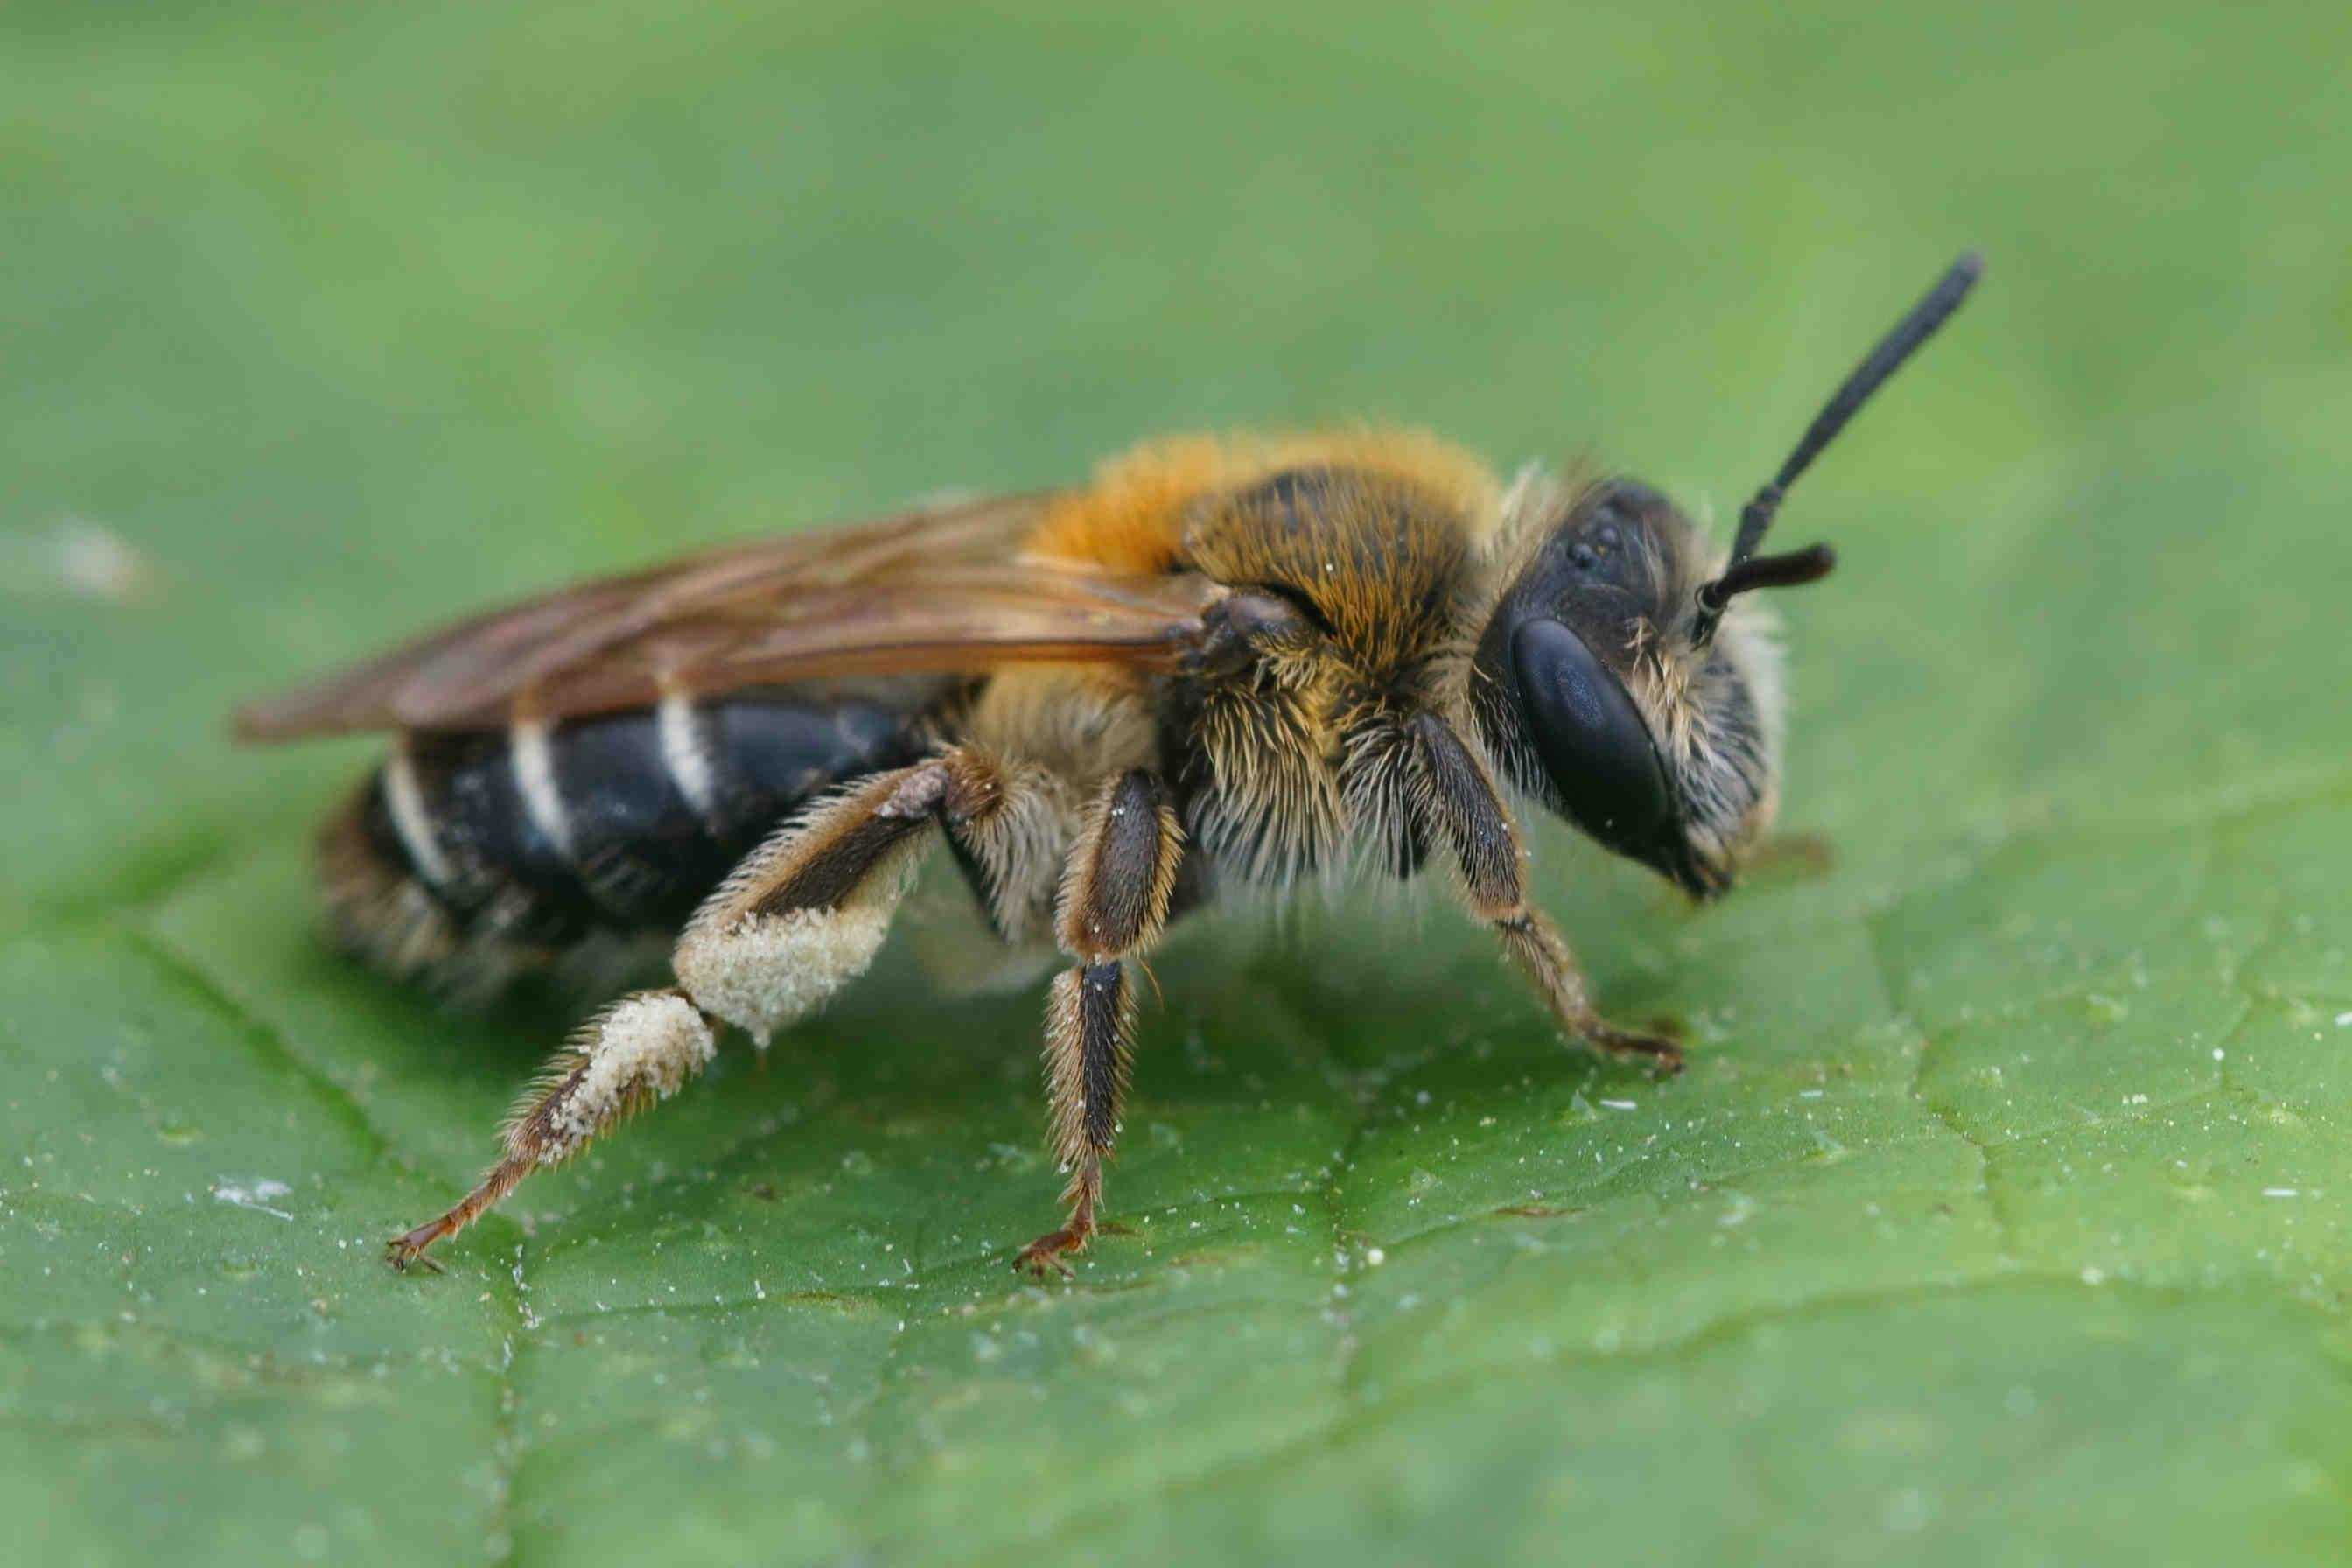 Do We Really Need to Save the Bees?